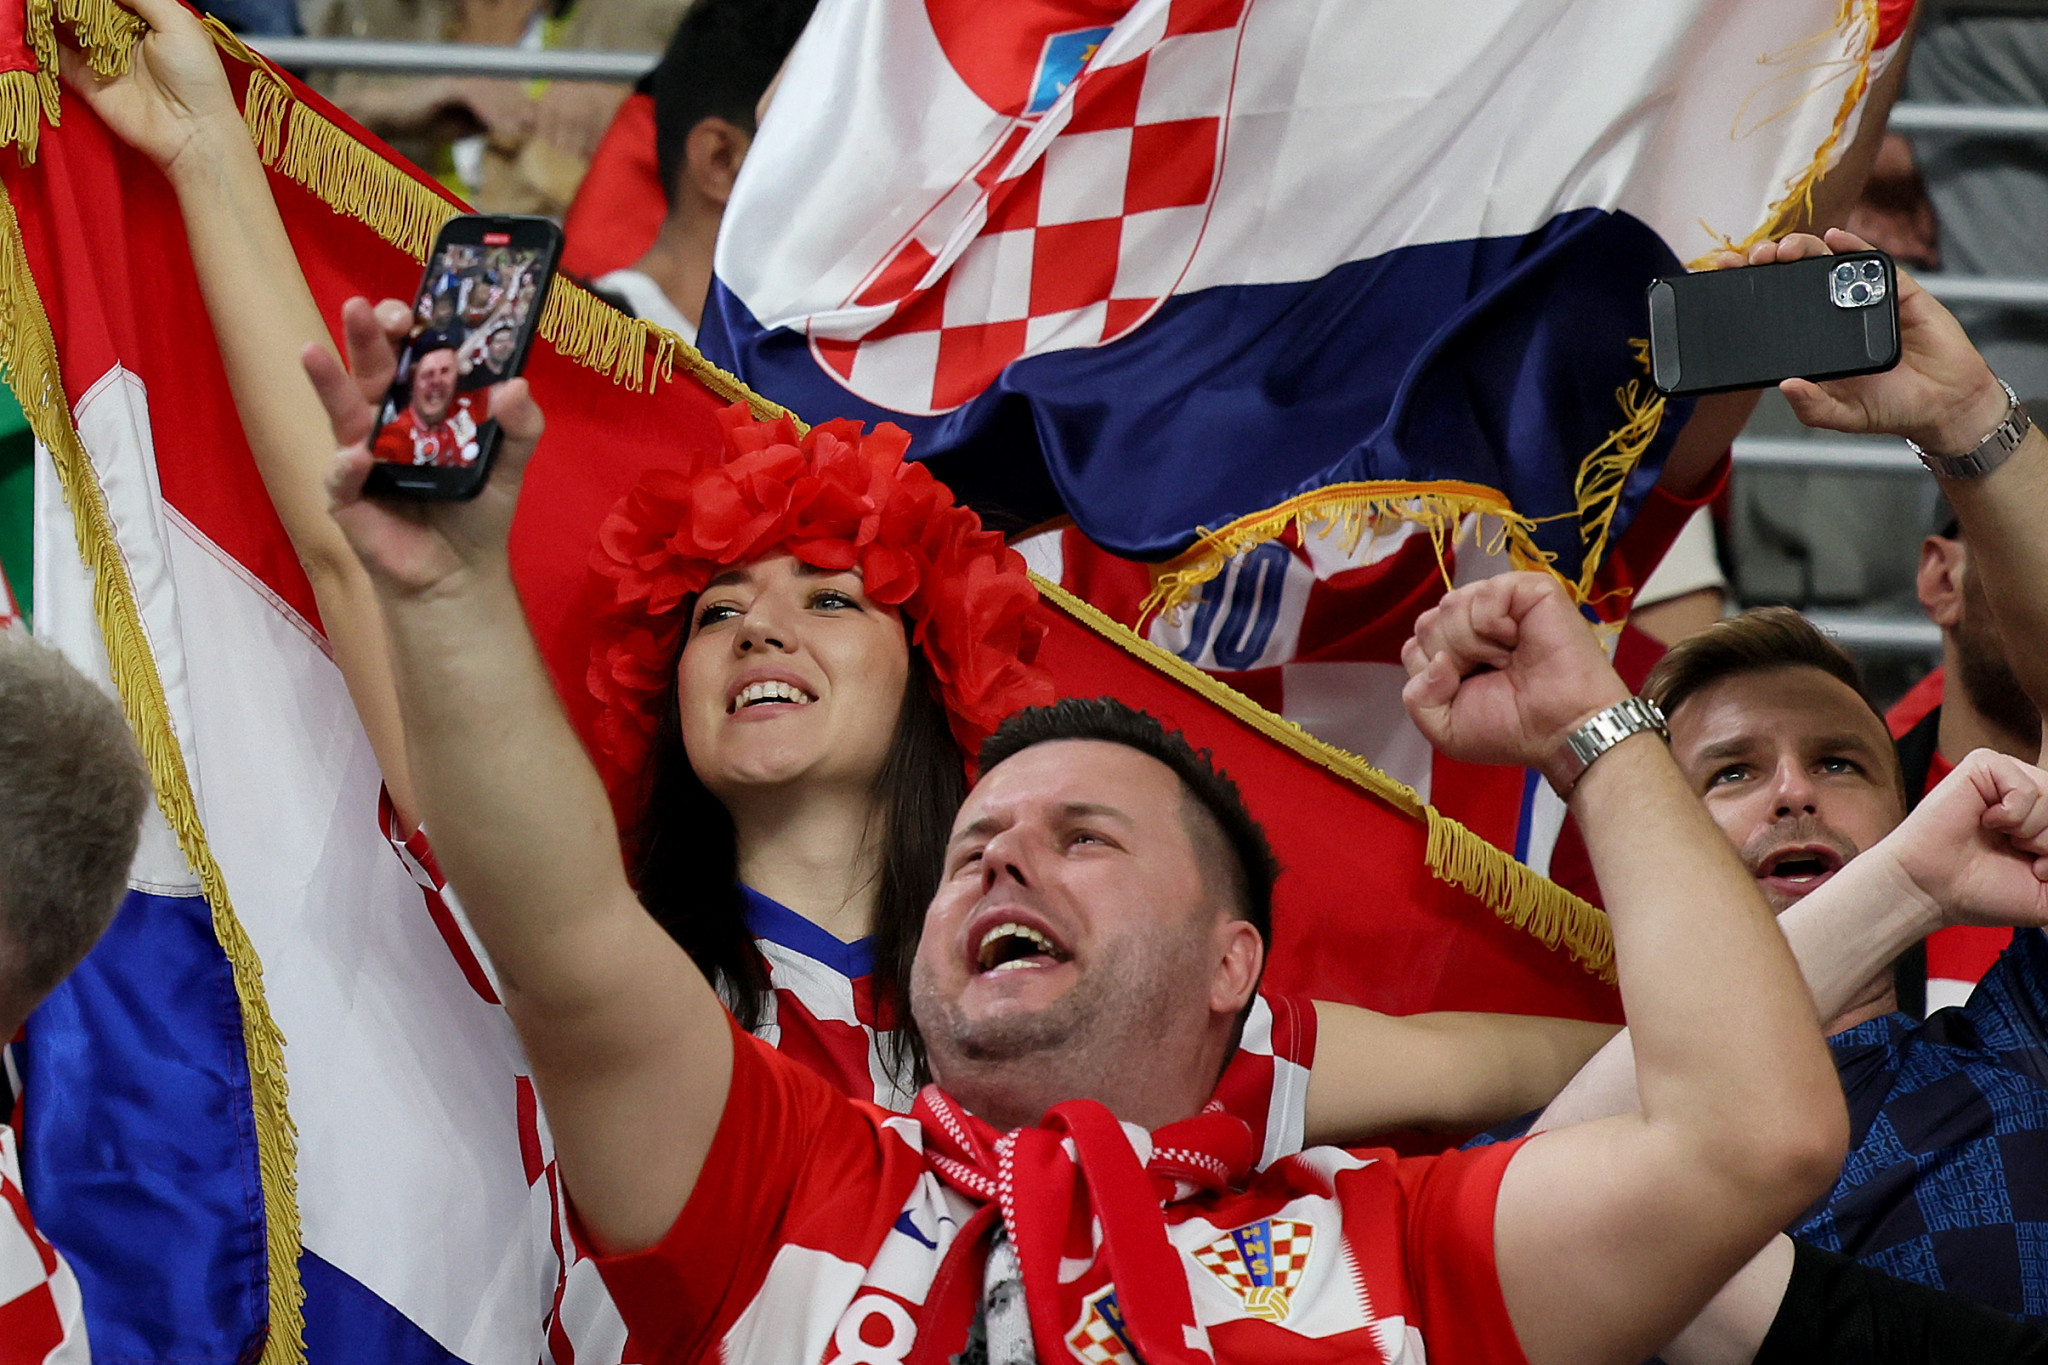 Croatian fans celebrating their team's victory ©Getty Images